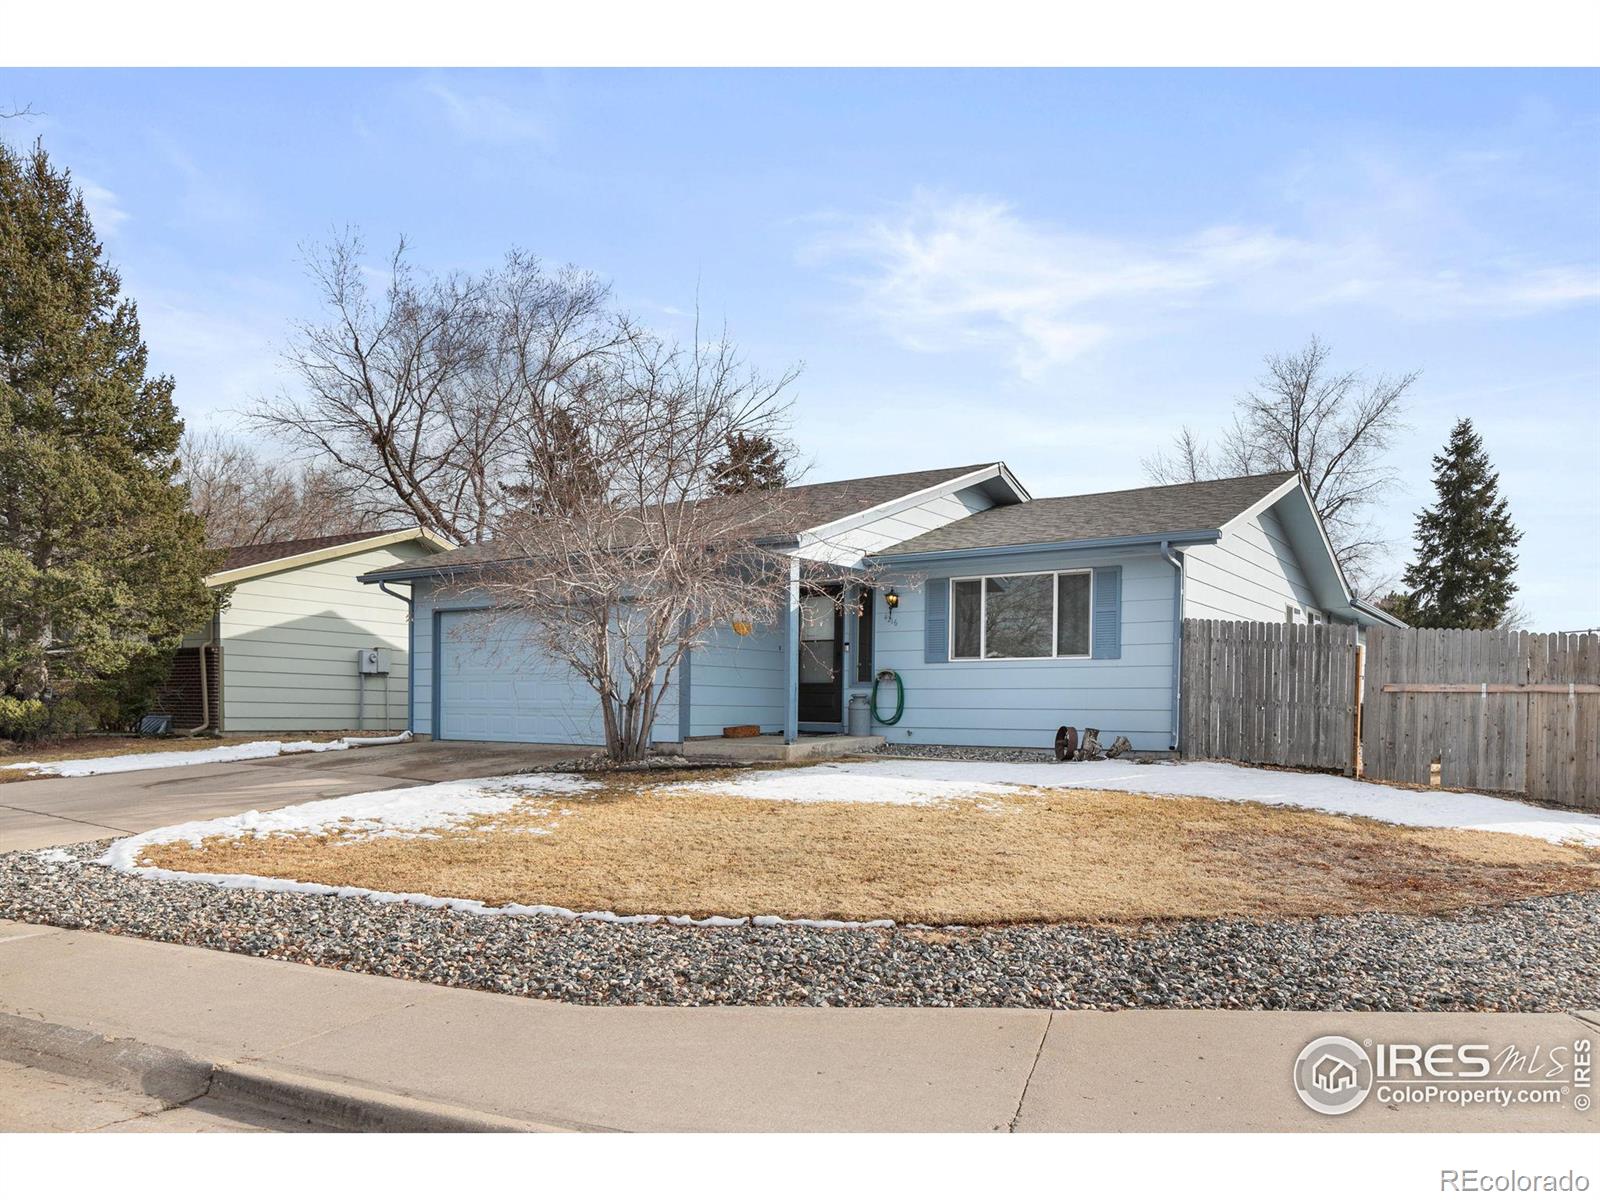 Report Image for 4216 W 9th Street,Greeley, Colorado